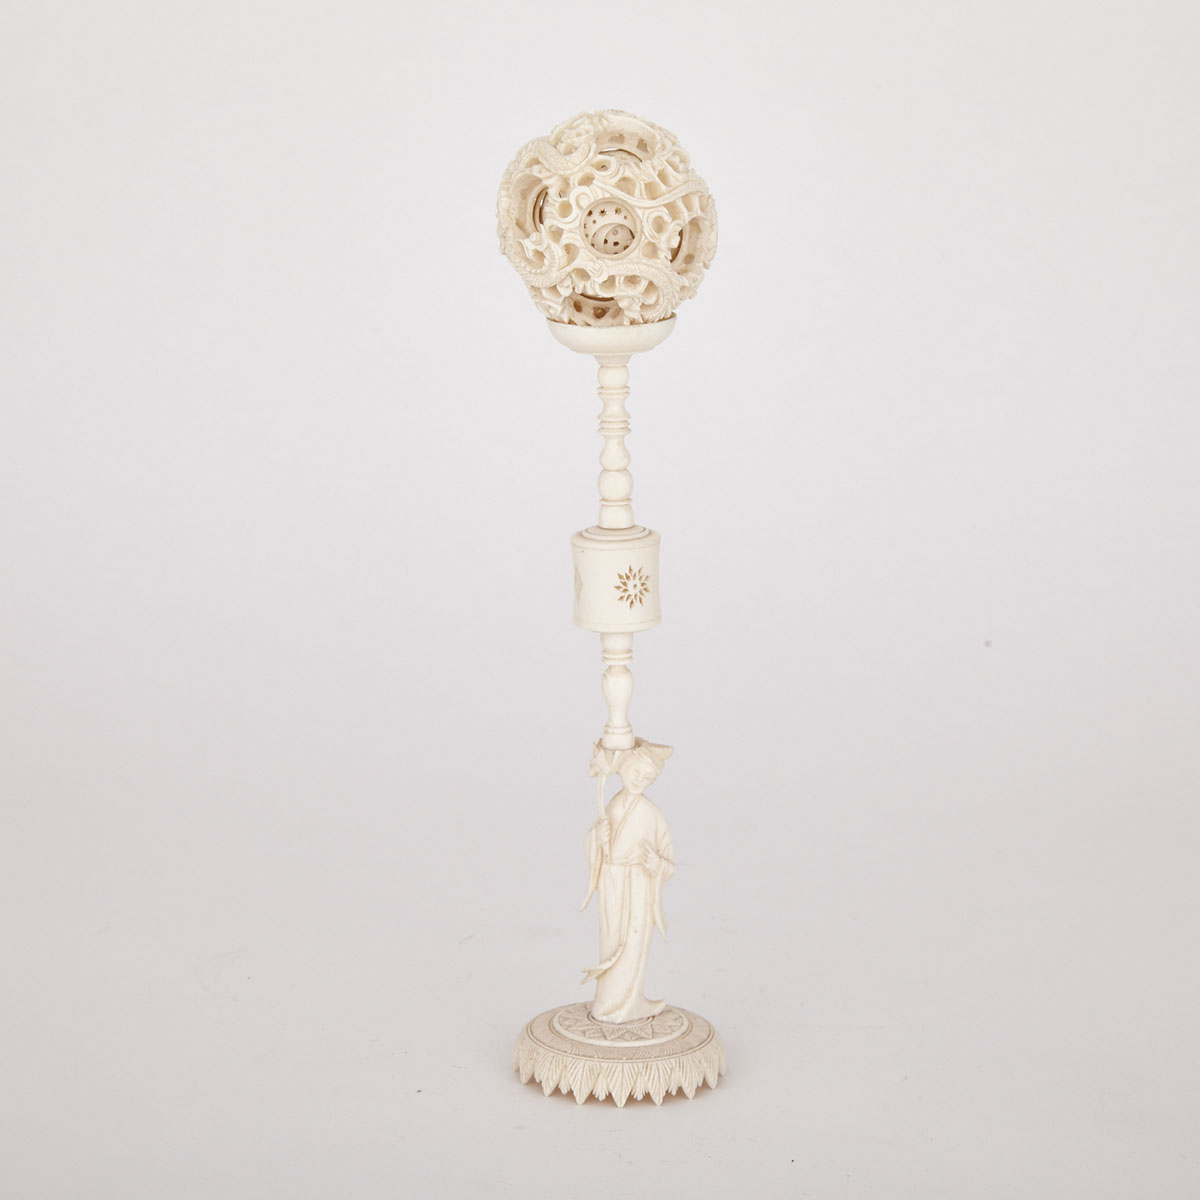 Carved Ivory Puzzleball with Stand